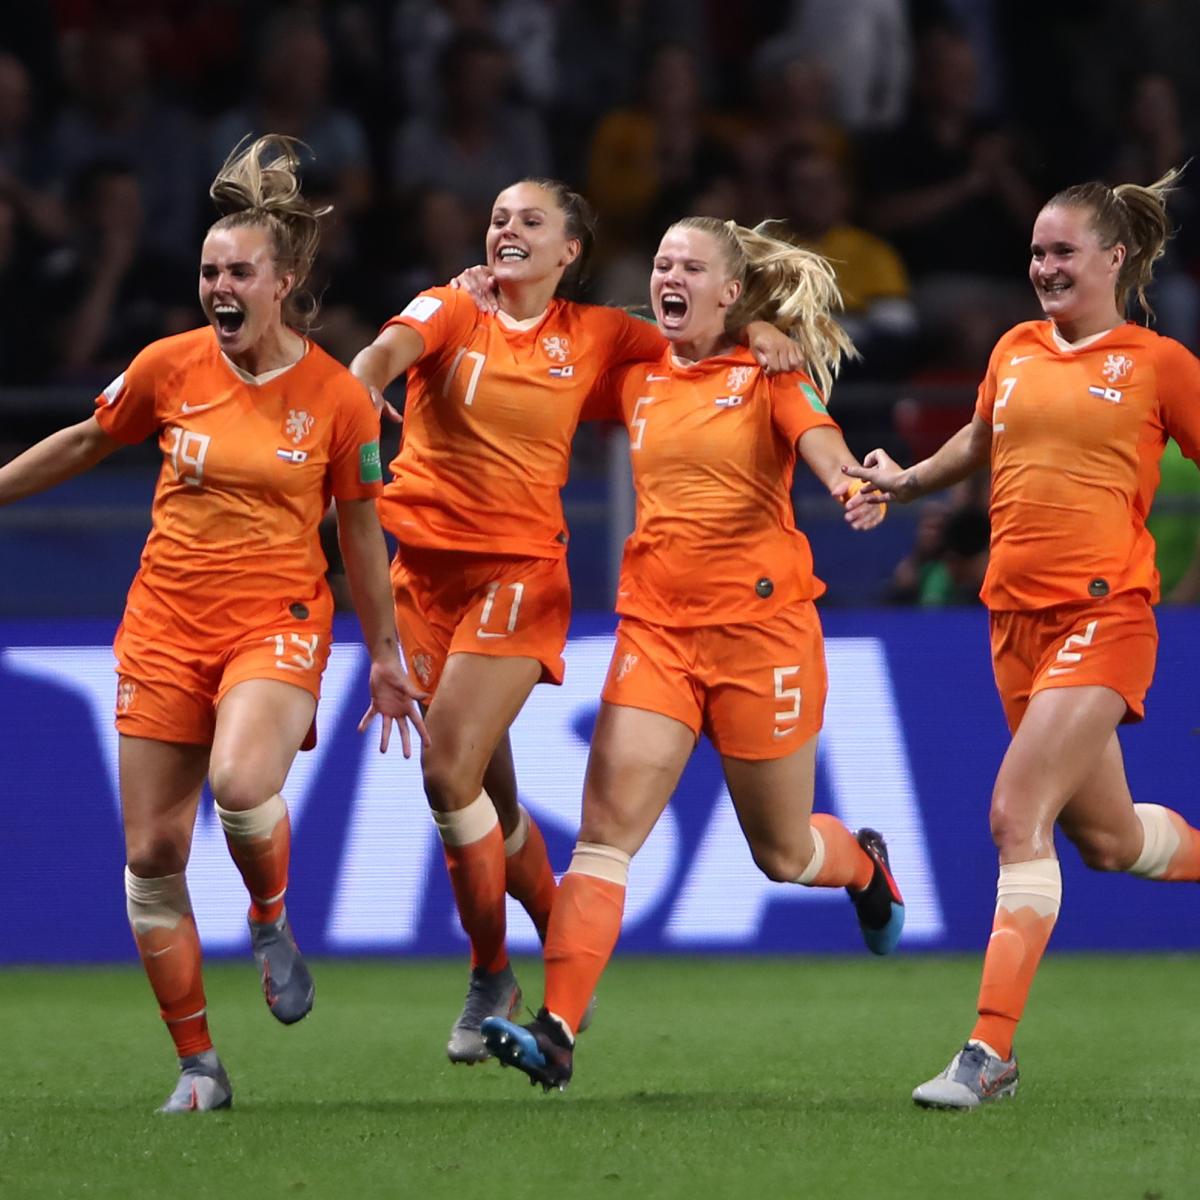 Women's World Cup QuarterFinals 2019 Bracket Dates, Teams, Times and